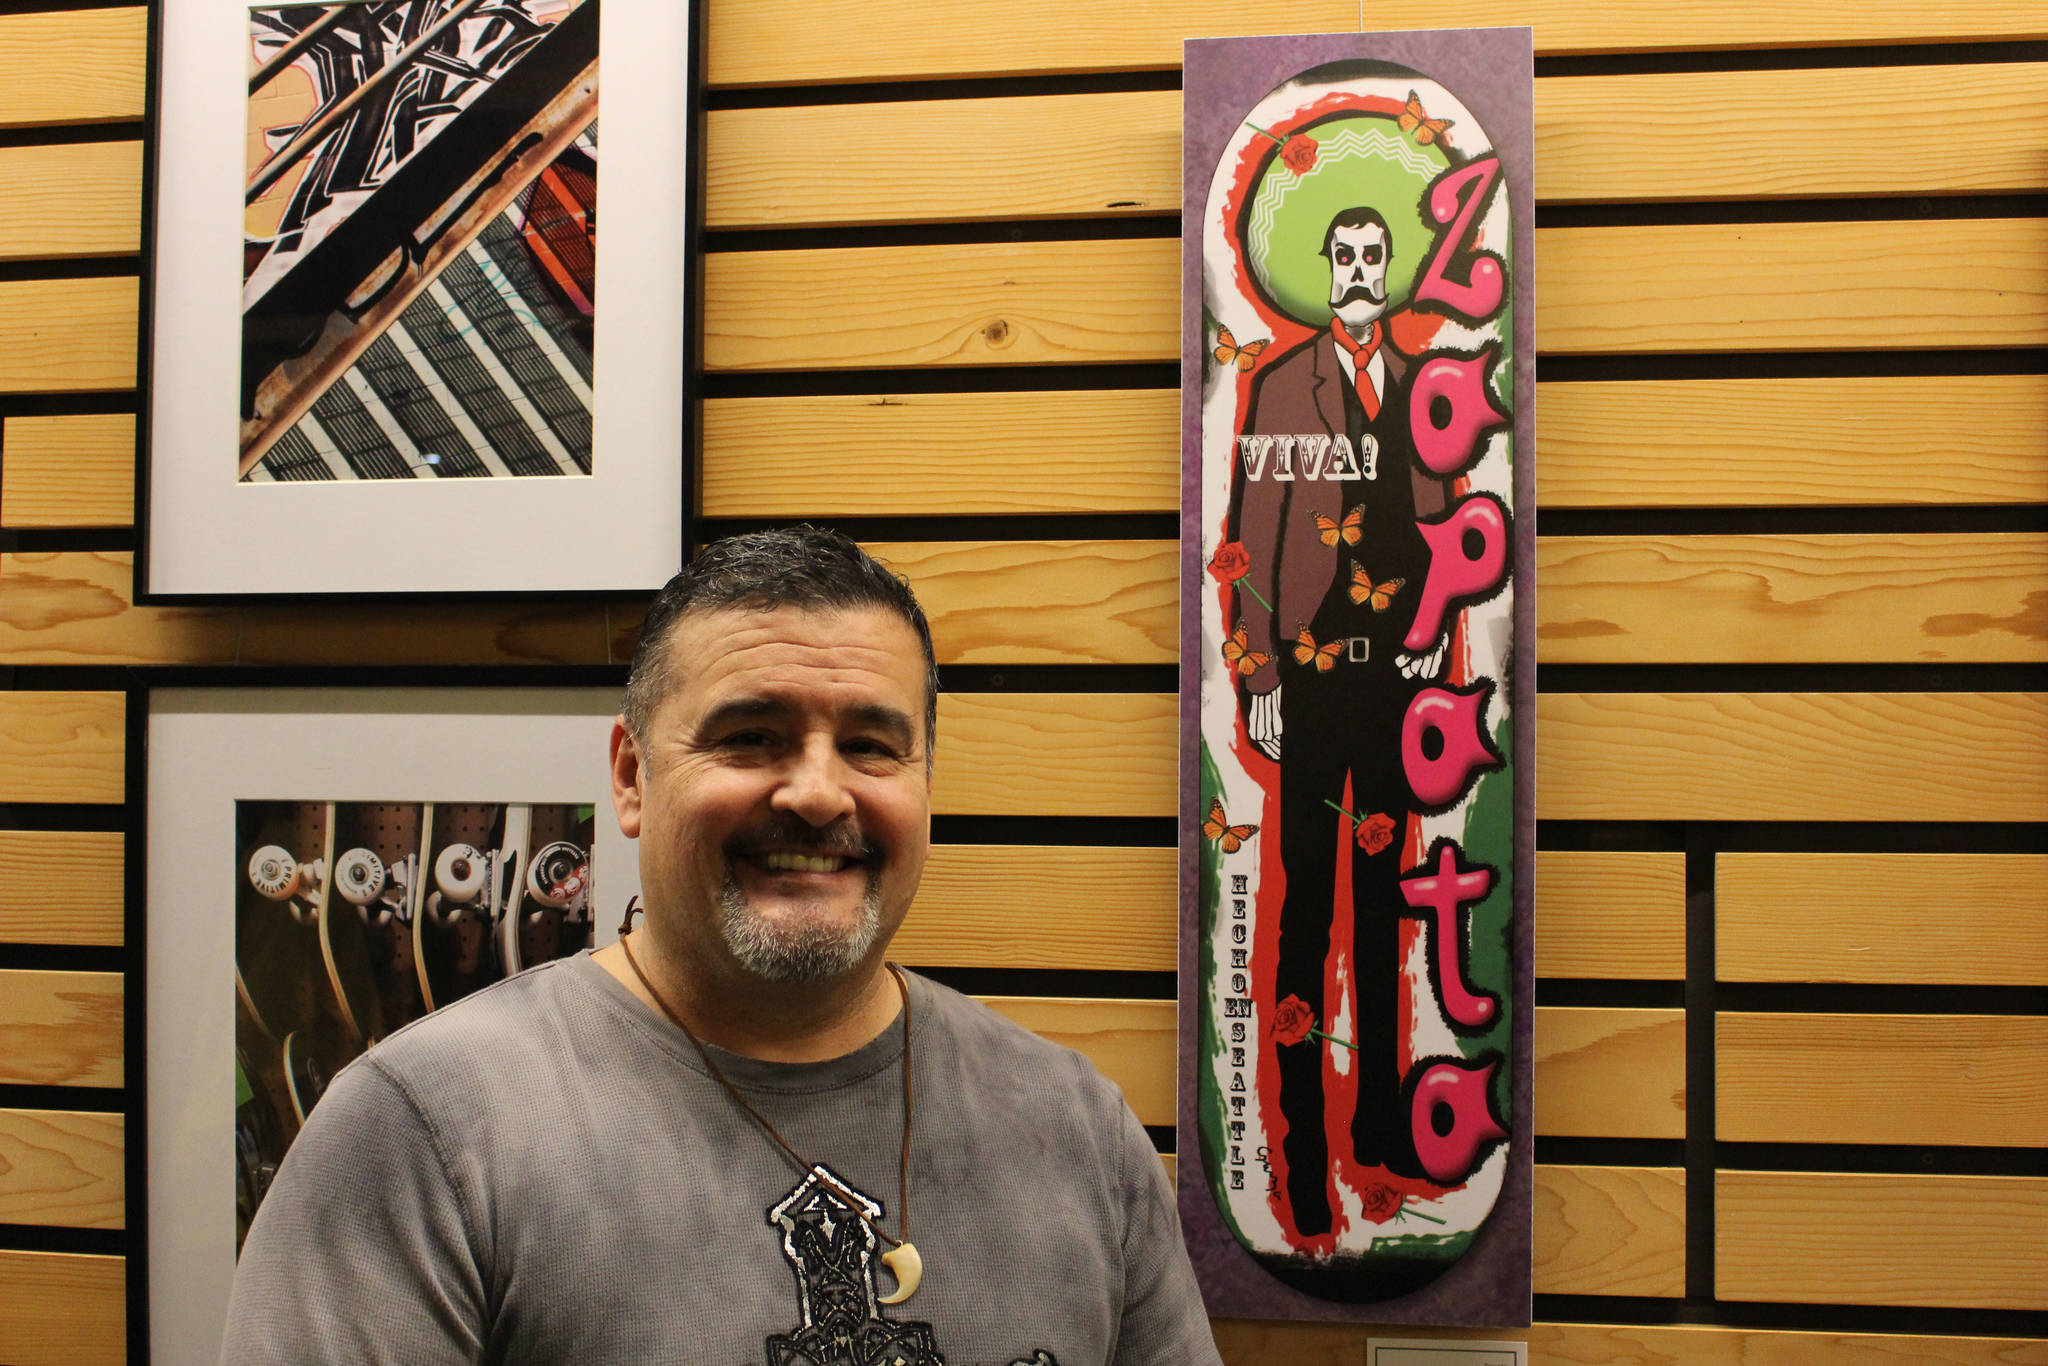 Mitchell Atencio/staff photo                                William Garza poses with his piece “Zapata” at the Skater Park Street Art Exhibit at City Hall in Kenmore on Feb. 7.